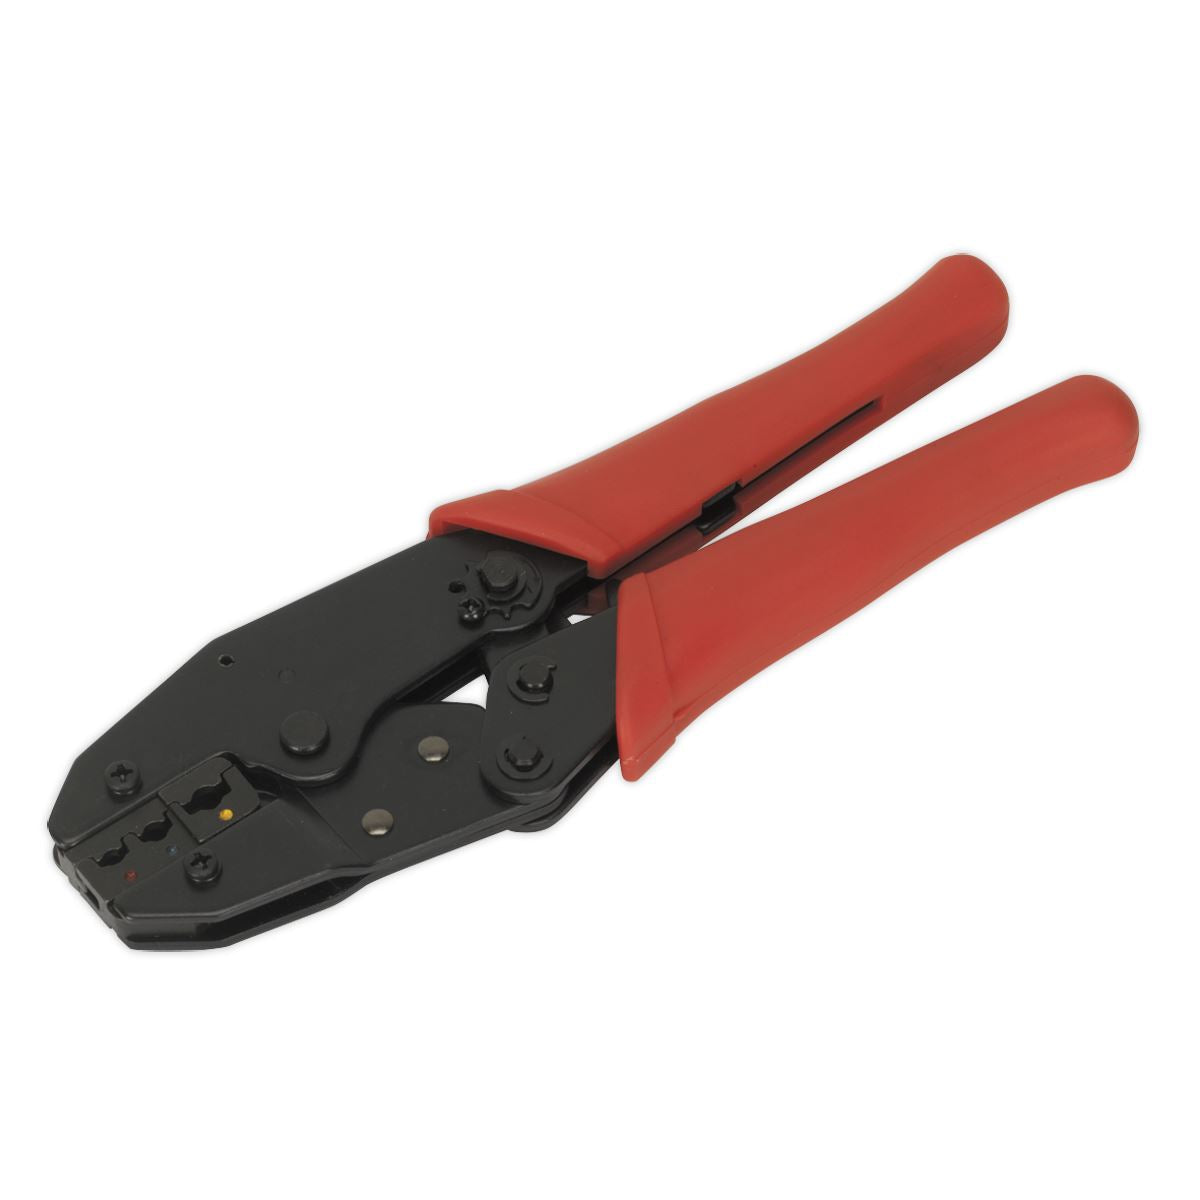 Siegen Ratchet Crimping Pliers for Insulated Terminals Electricans Crimpers